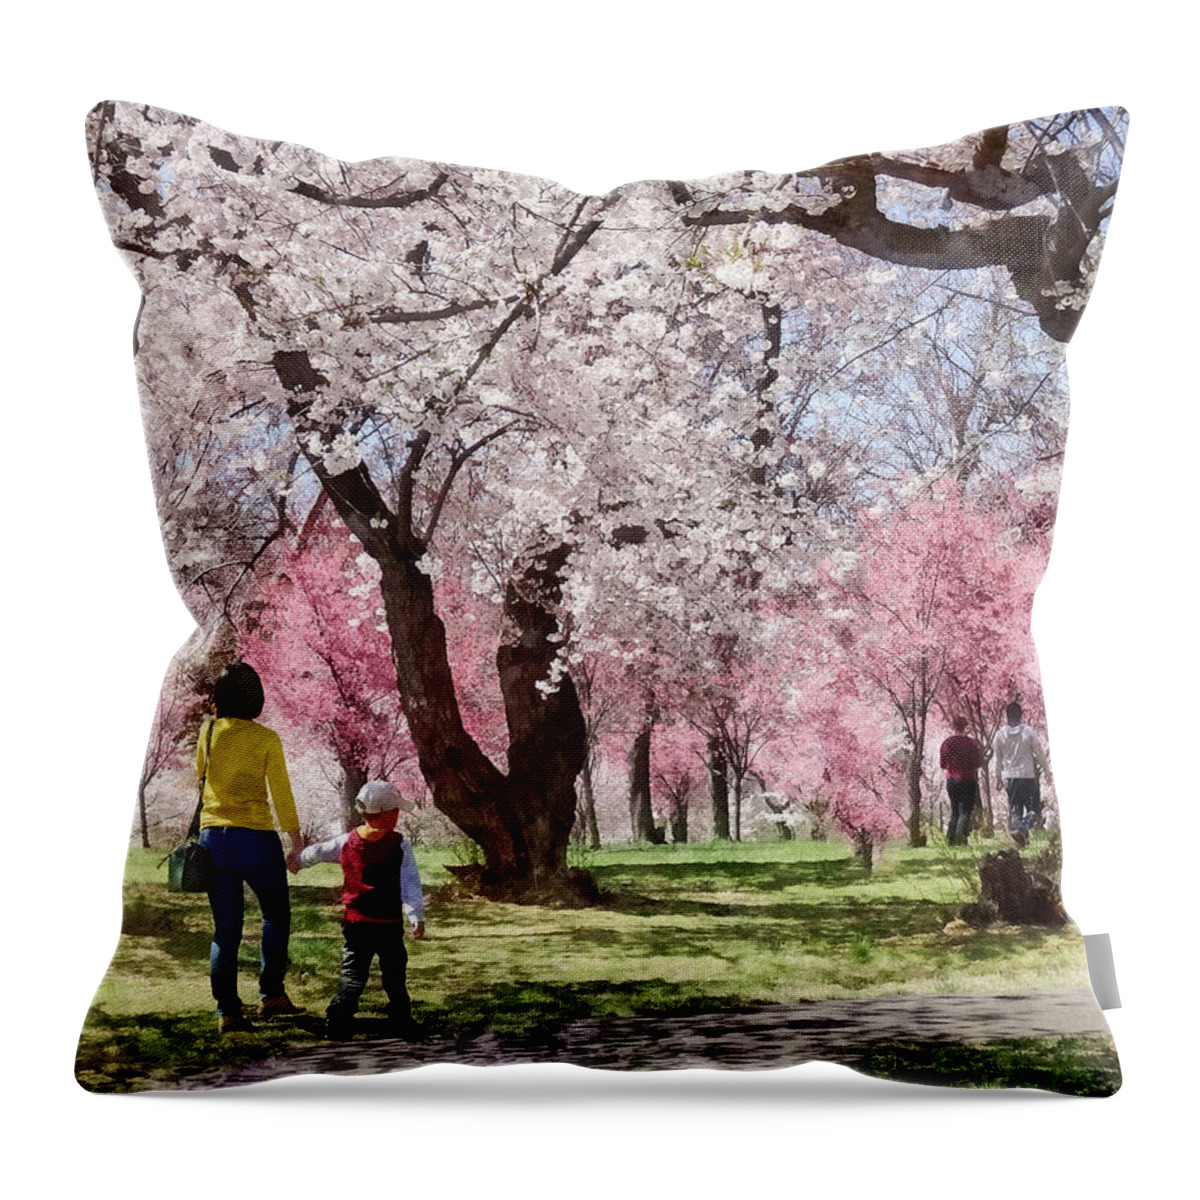 Spring Throw Pillow featuring the photograph Lovely Spring Day For a Walk by Susan Savad